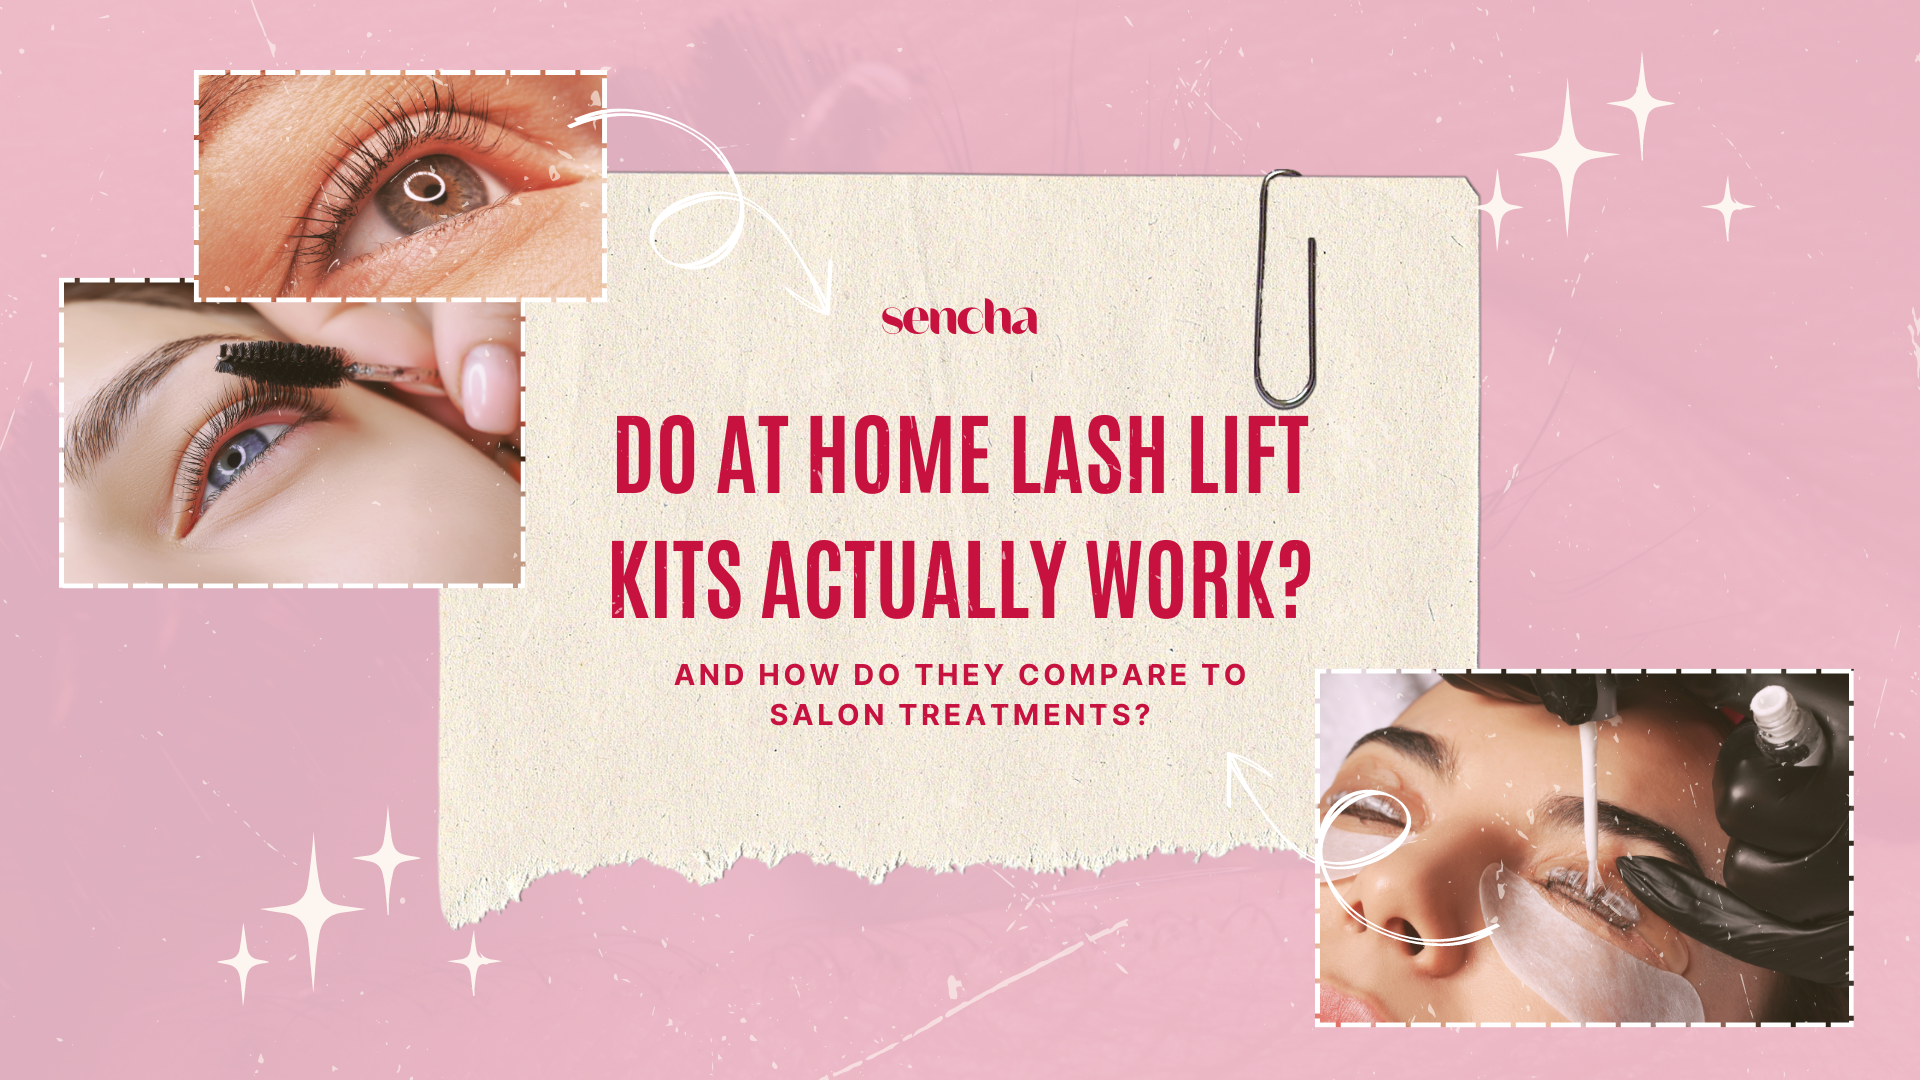 Do at home lash lift kits actually work? And how do they compare to salon treatments?